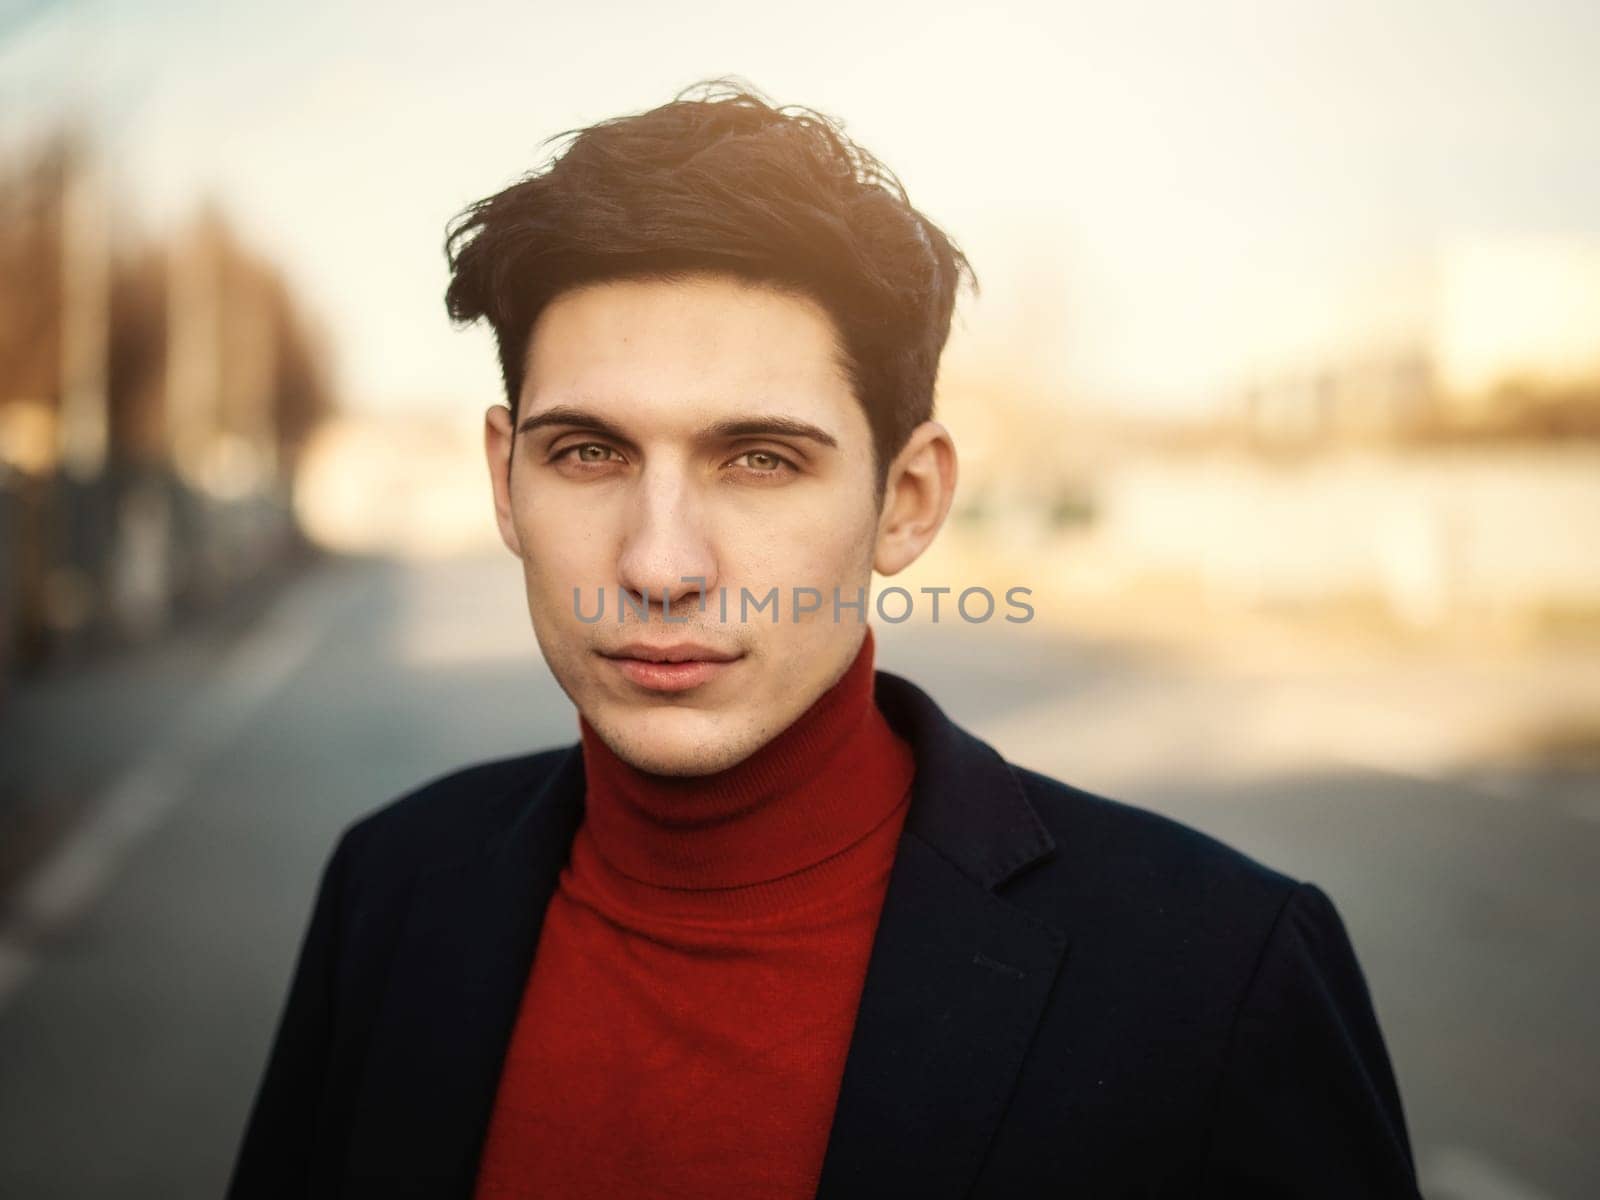 Handsome young man in city street, looking at camera with serious expression, wearing suit jacket and turtleneck